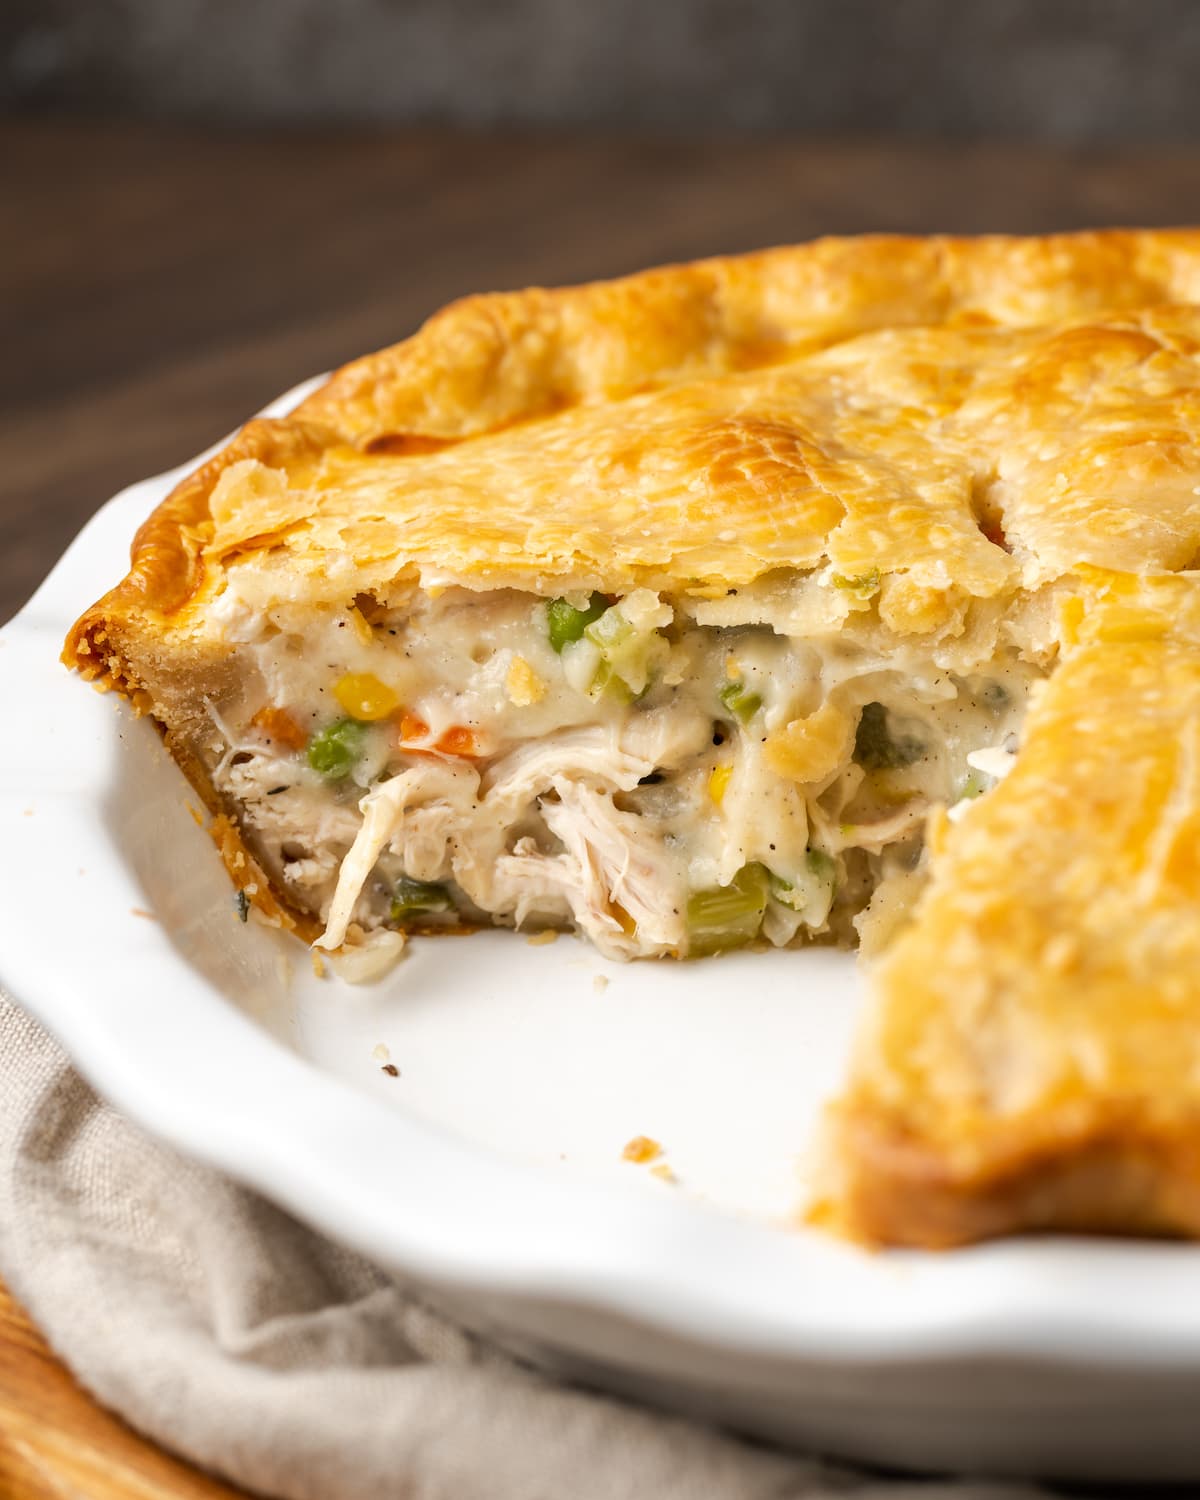 Chicken pot pie in a pie plate with a slice missing.